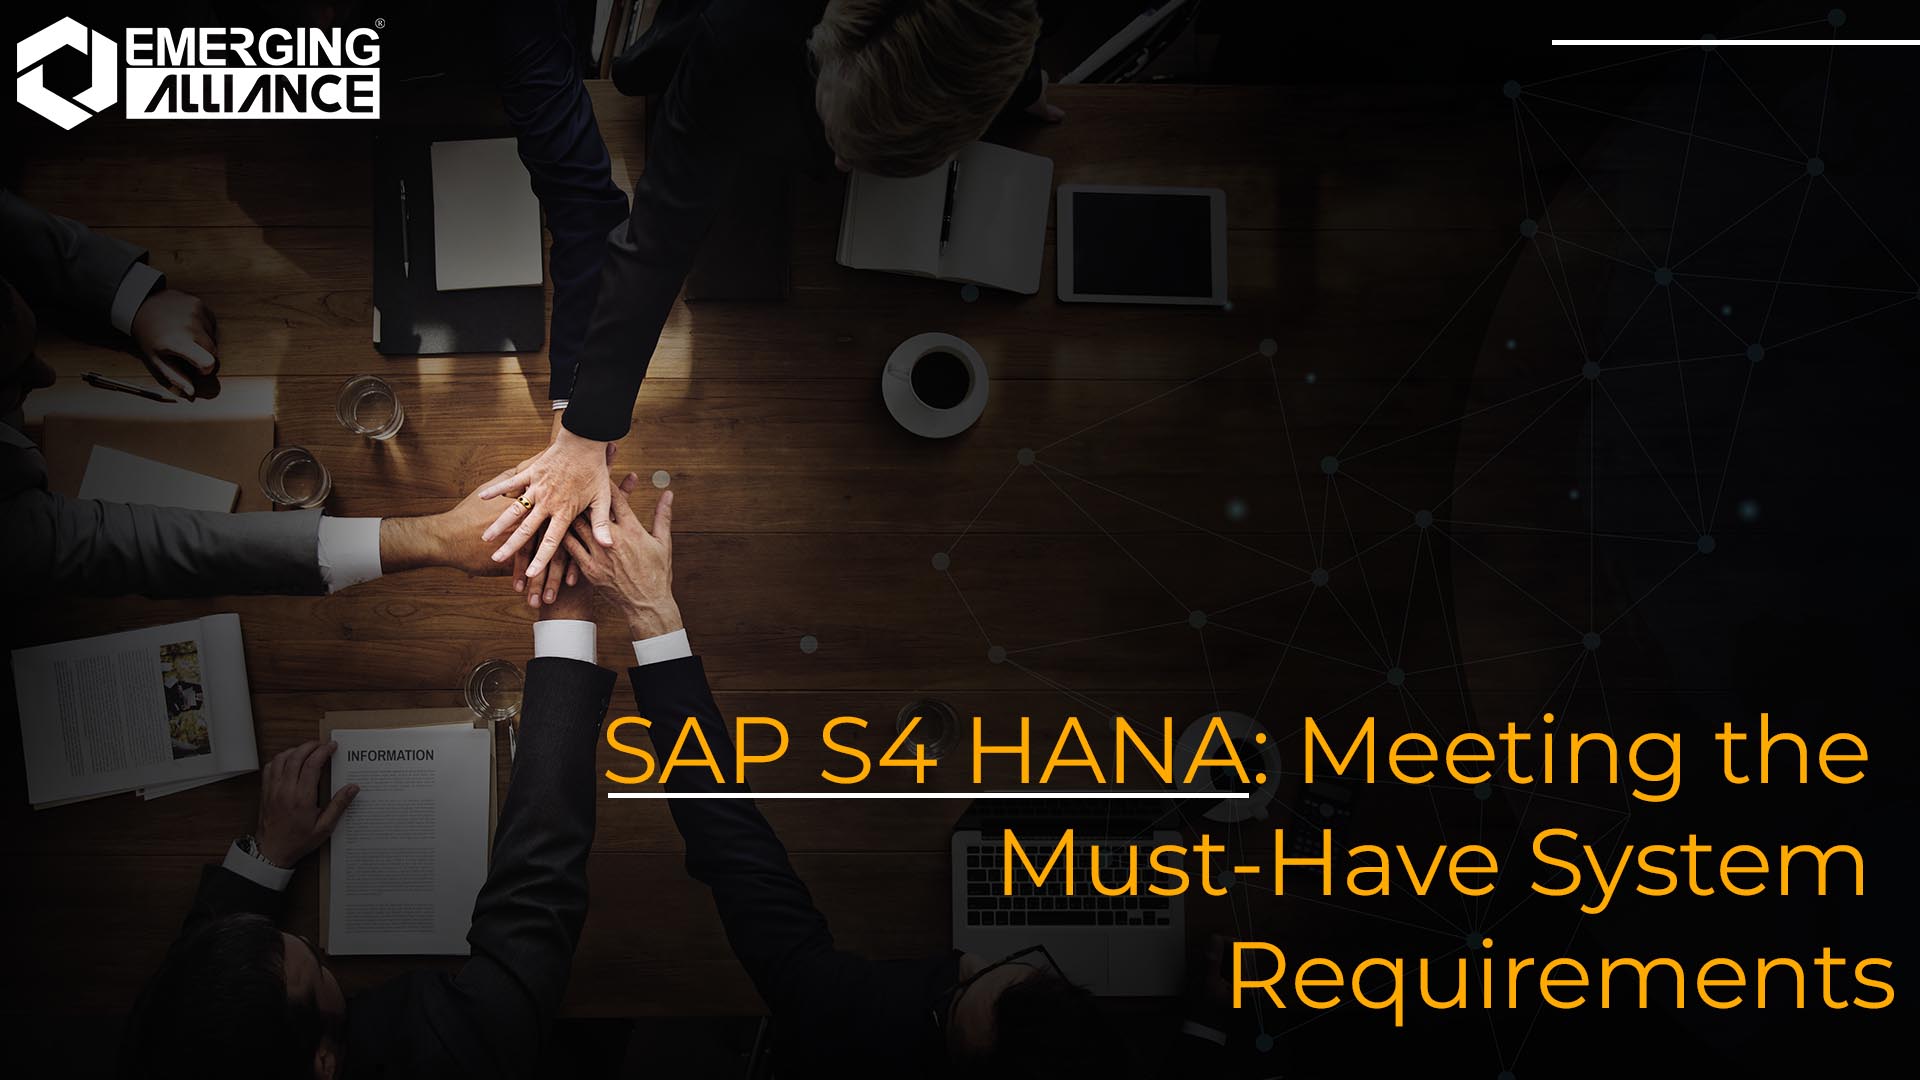 SAP S4 HANA System Requirements